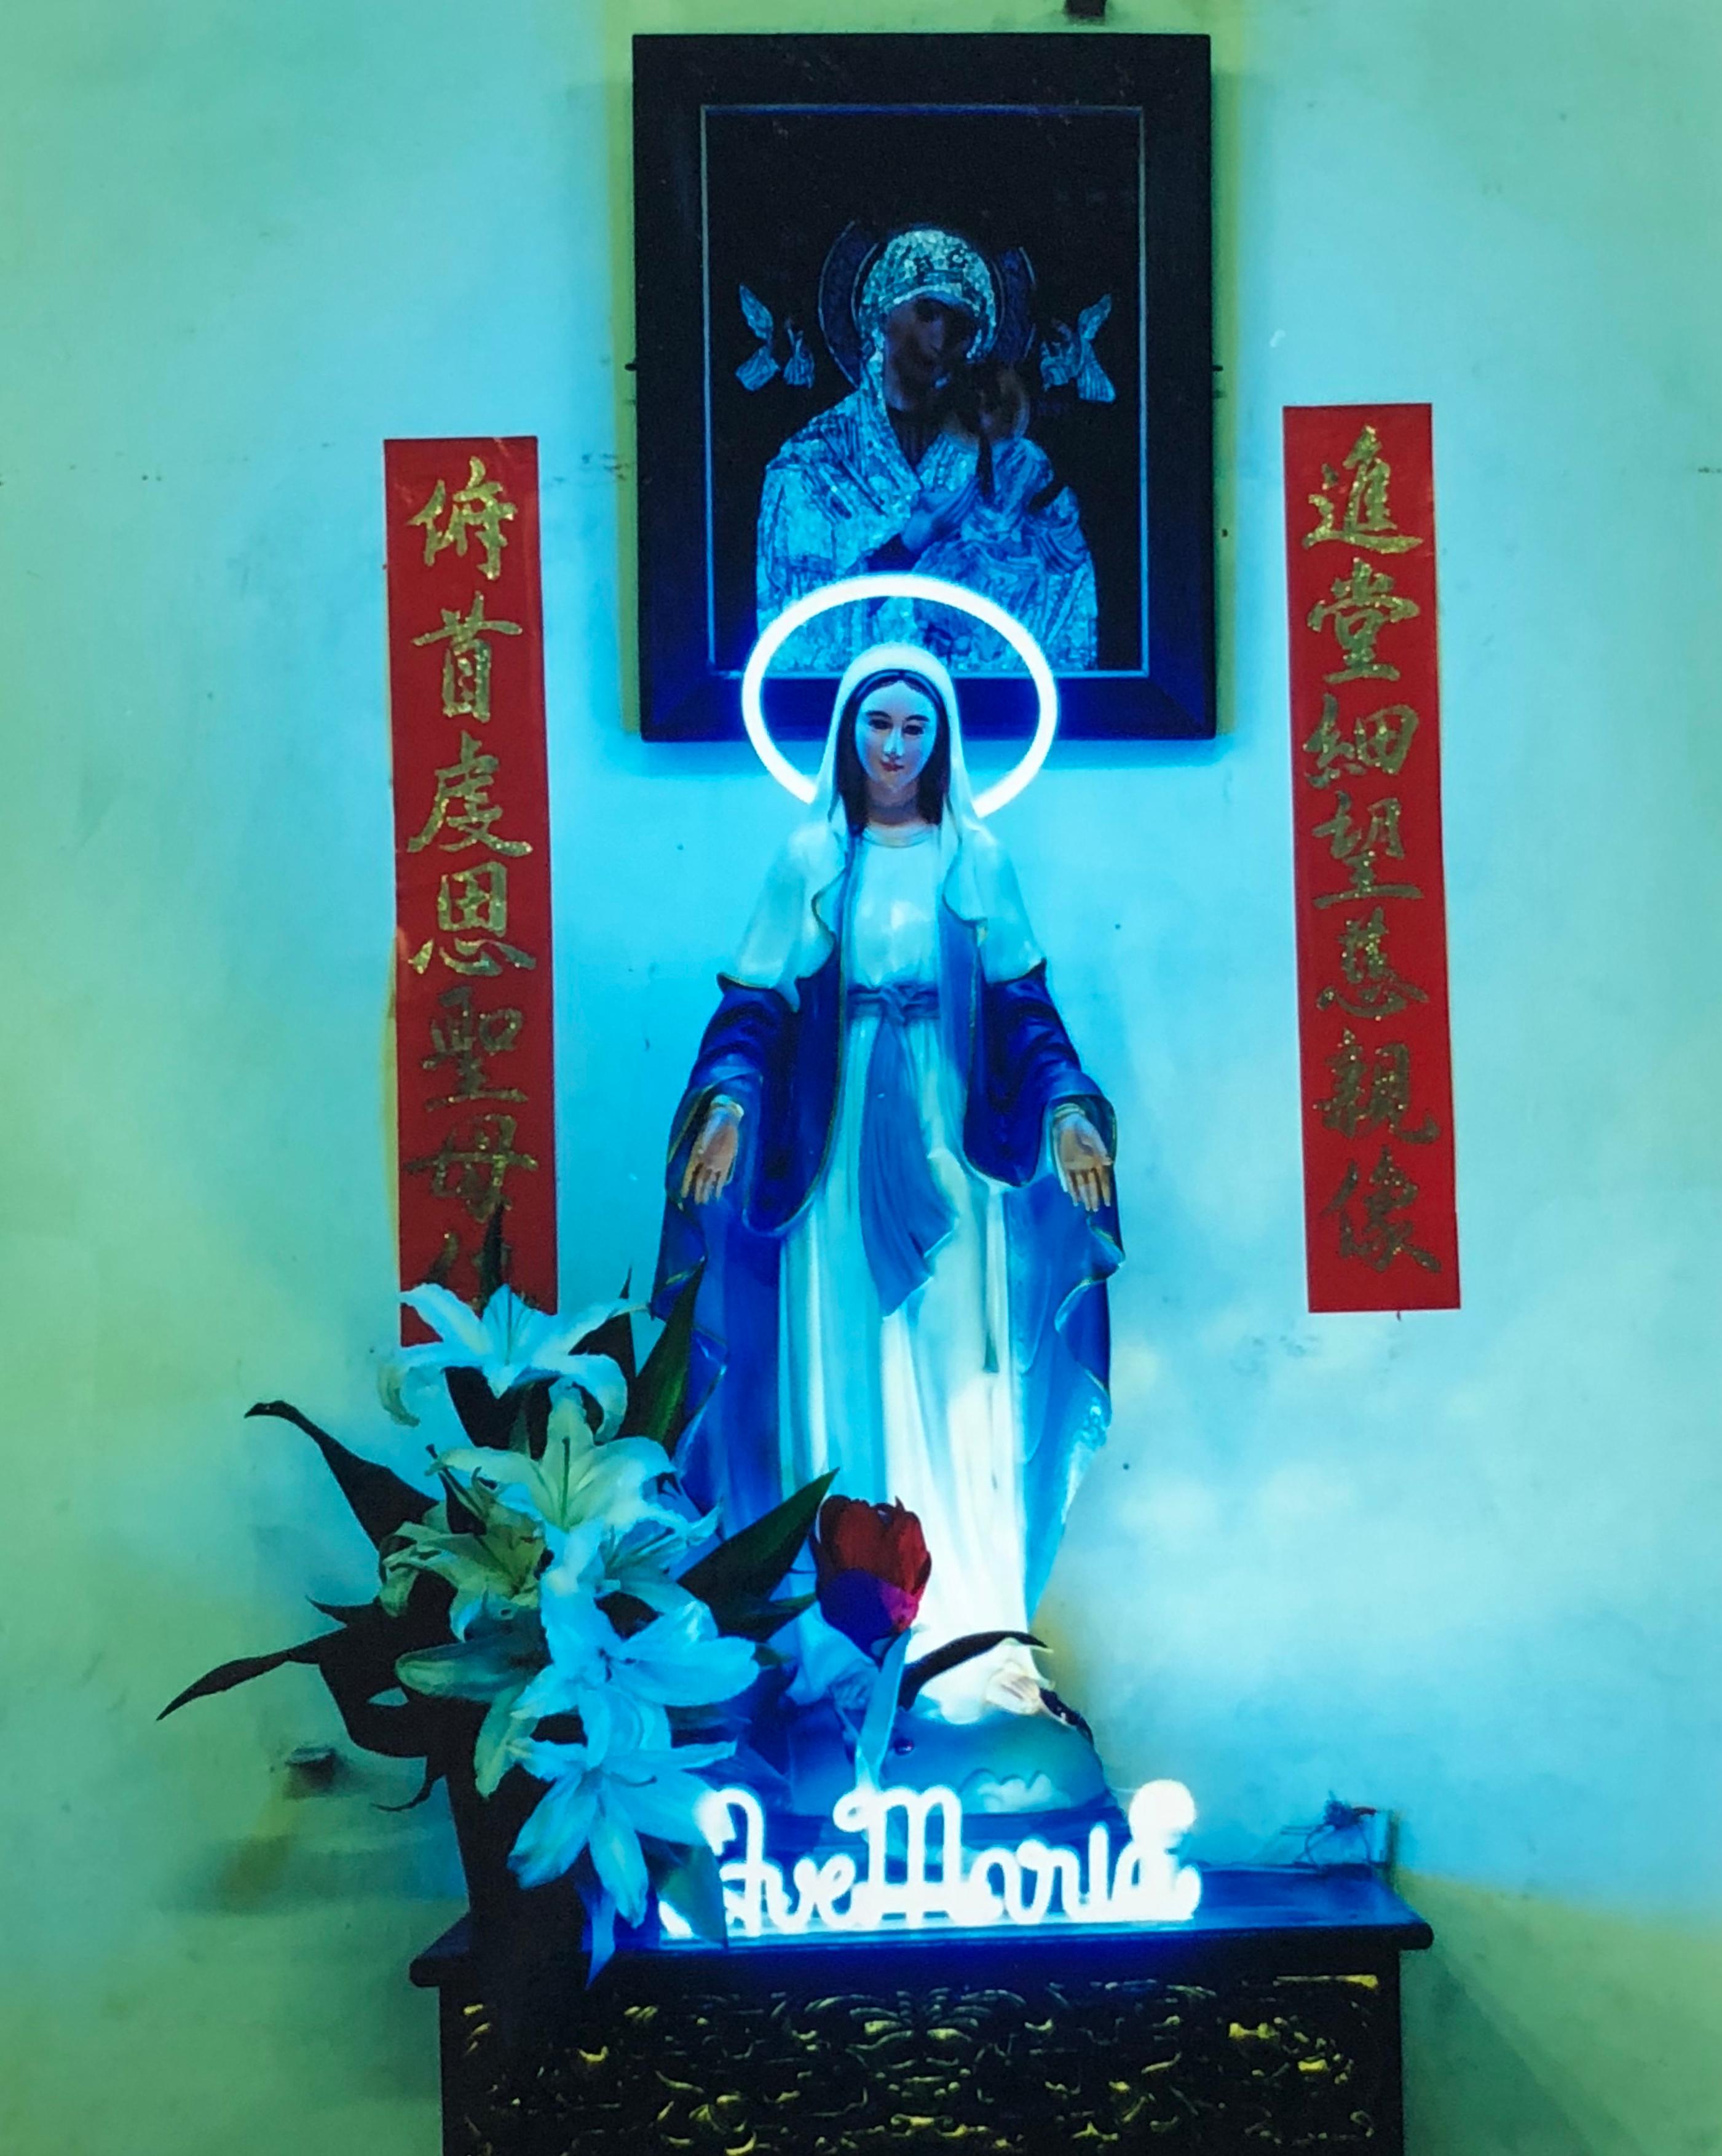 Richard Heeps Portrait Photograph - Ave Maria, Ho Chi Minh City - Religious Kitsch Contemporary Color Photography